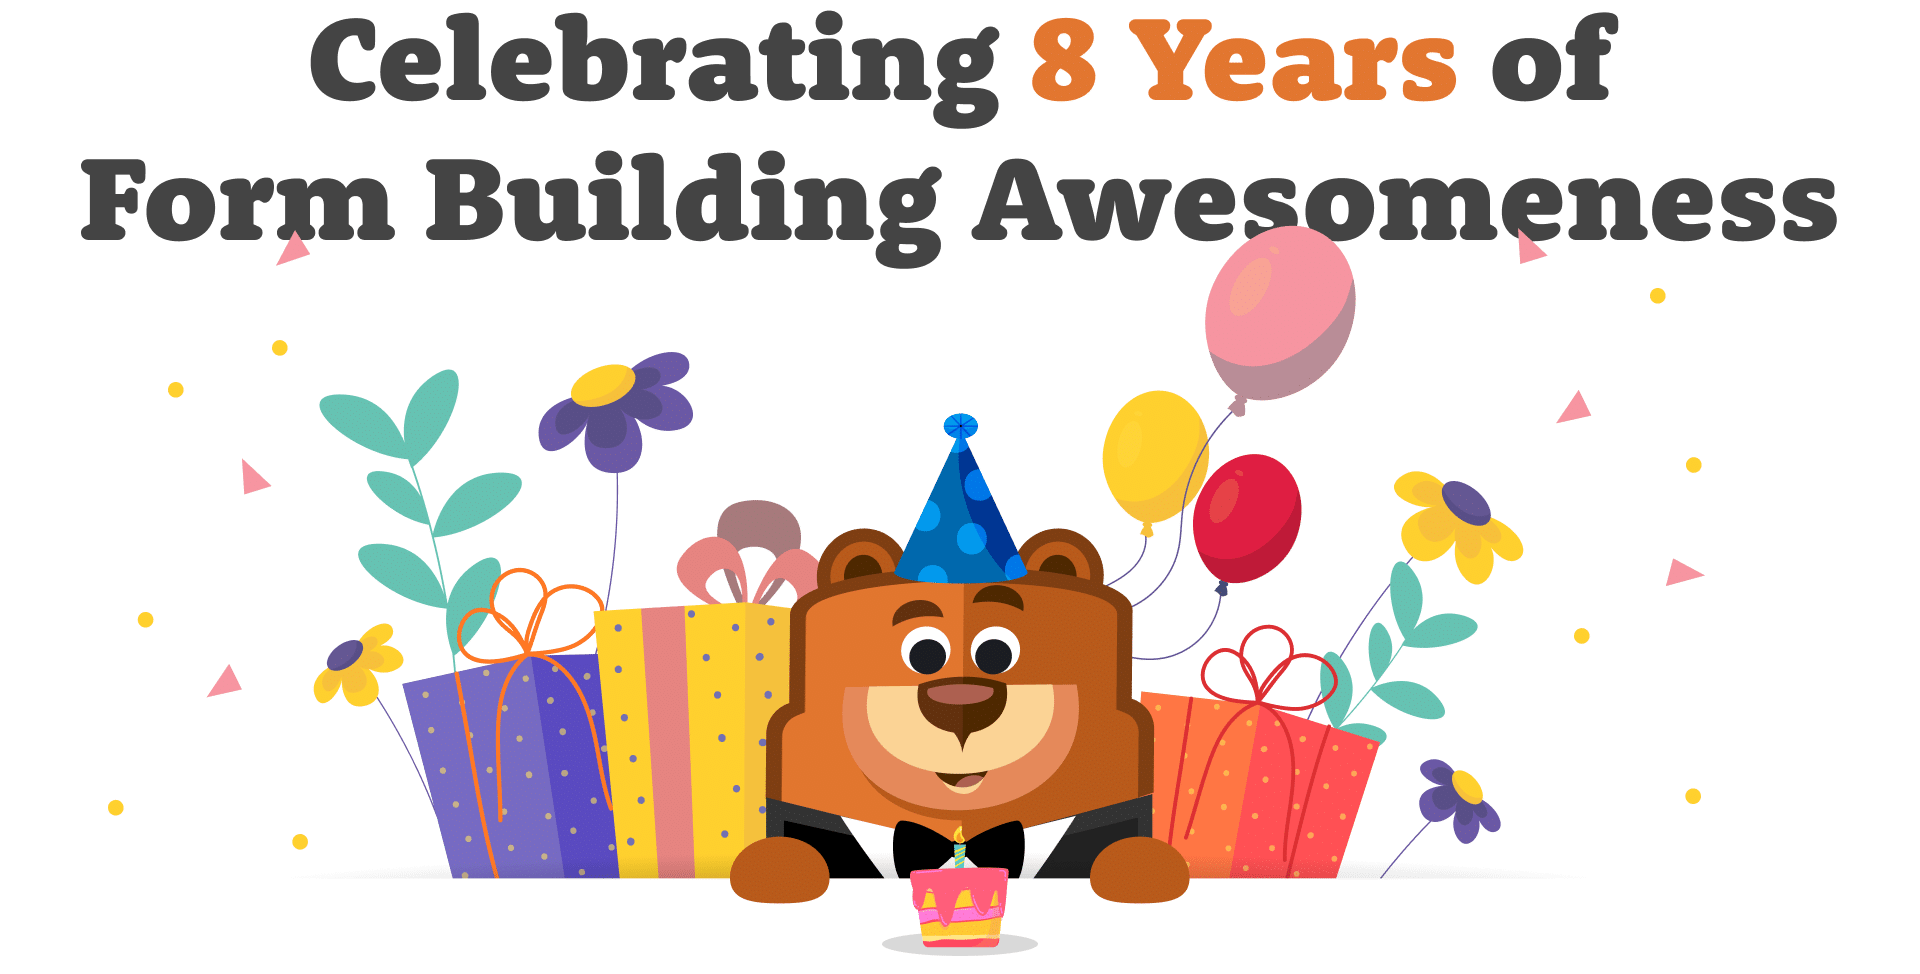 Celebrating 8 Years of Form Building Awesomeness